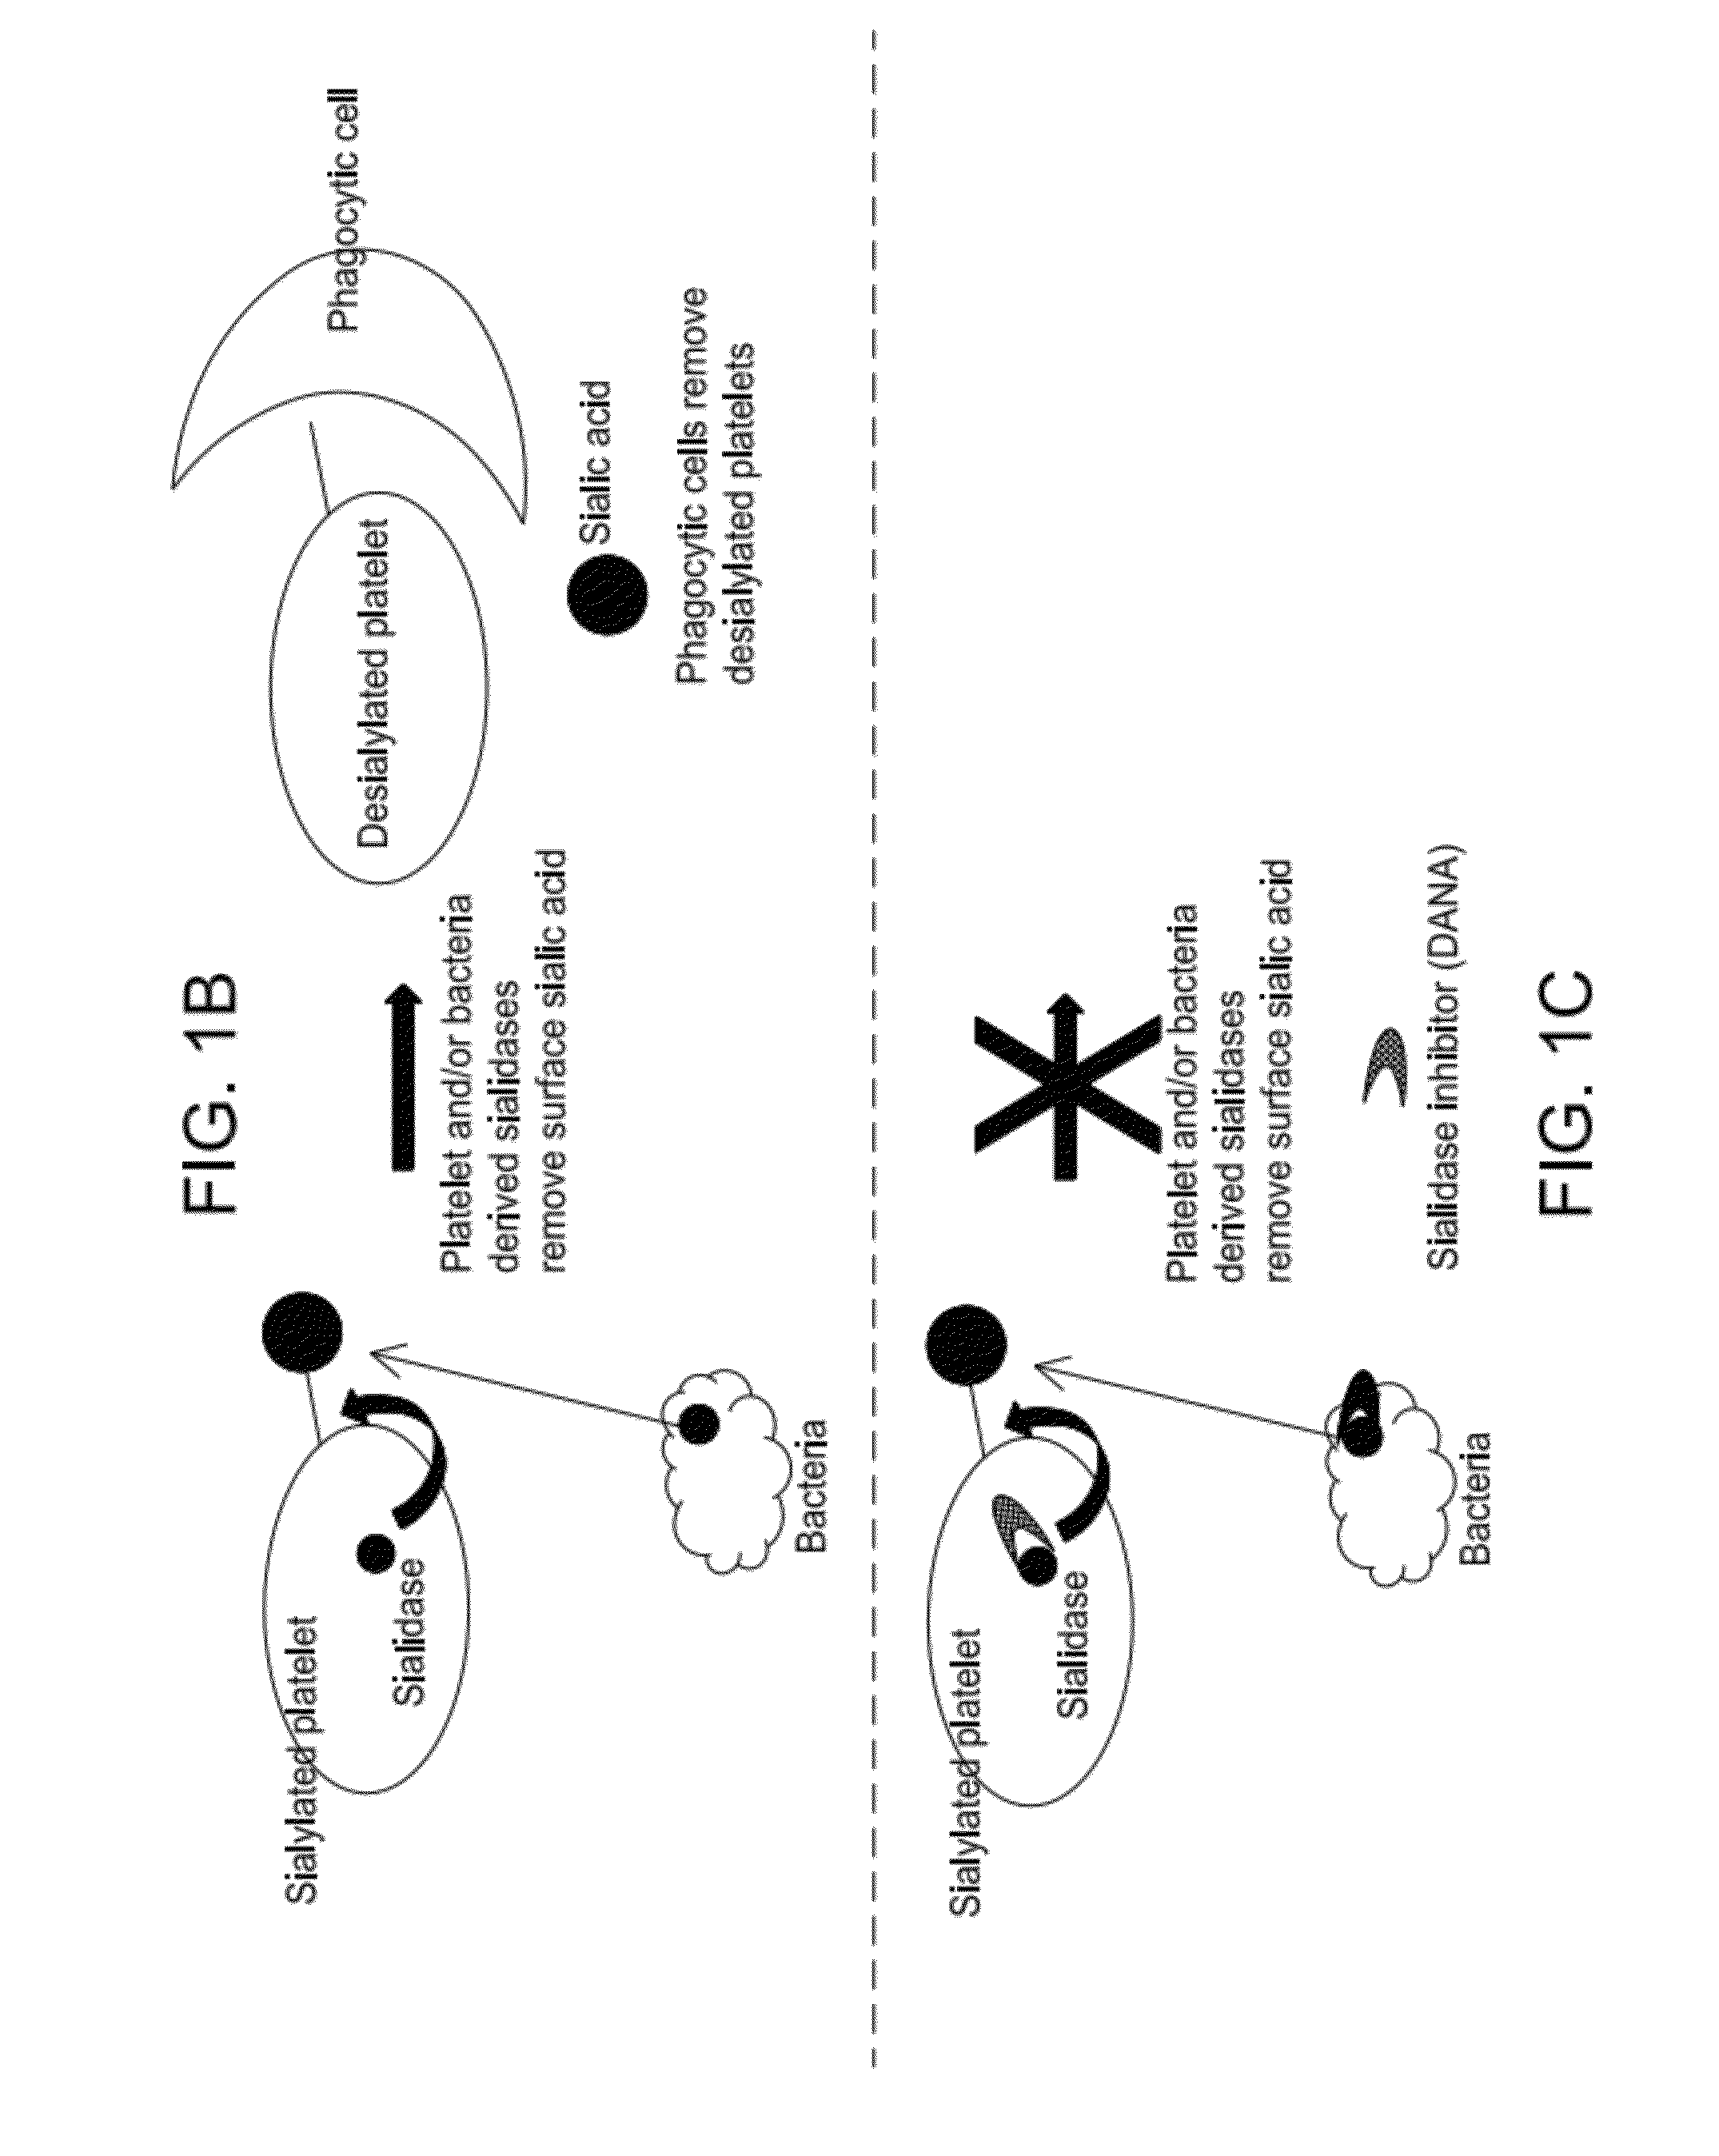 Platelet Storage and Reduced Bacterial Proliferation In Platelet Products Using A Sialidase Inhibitor